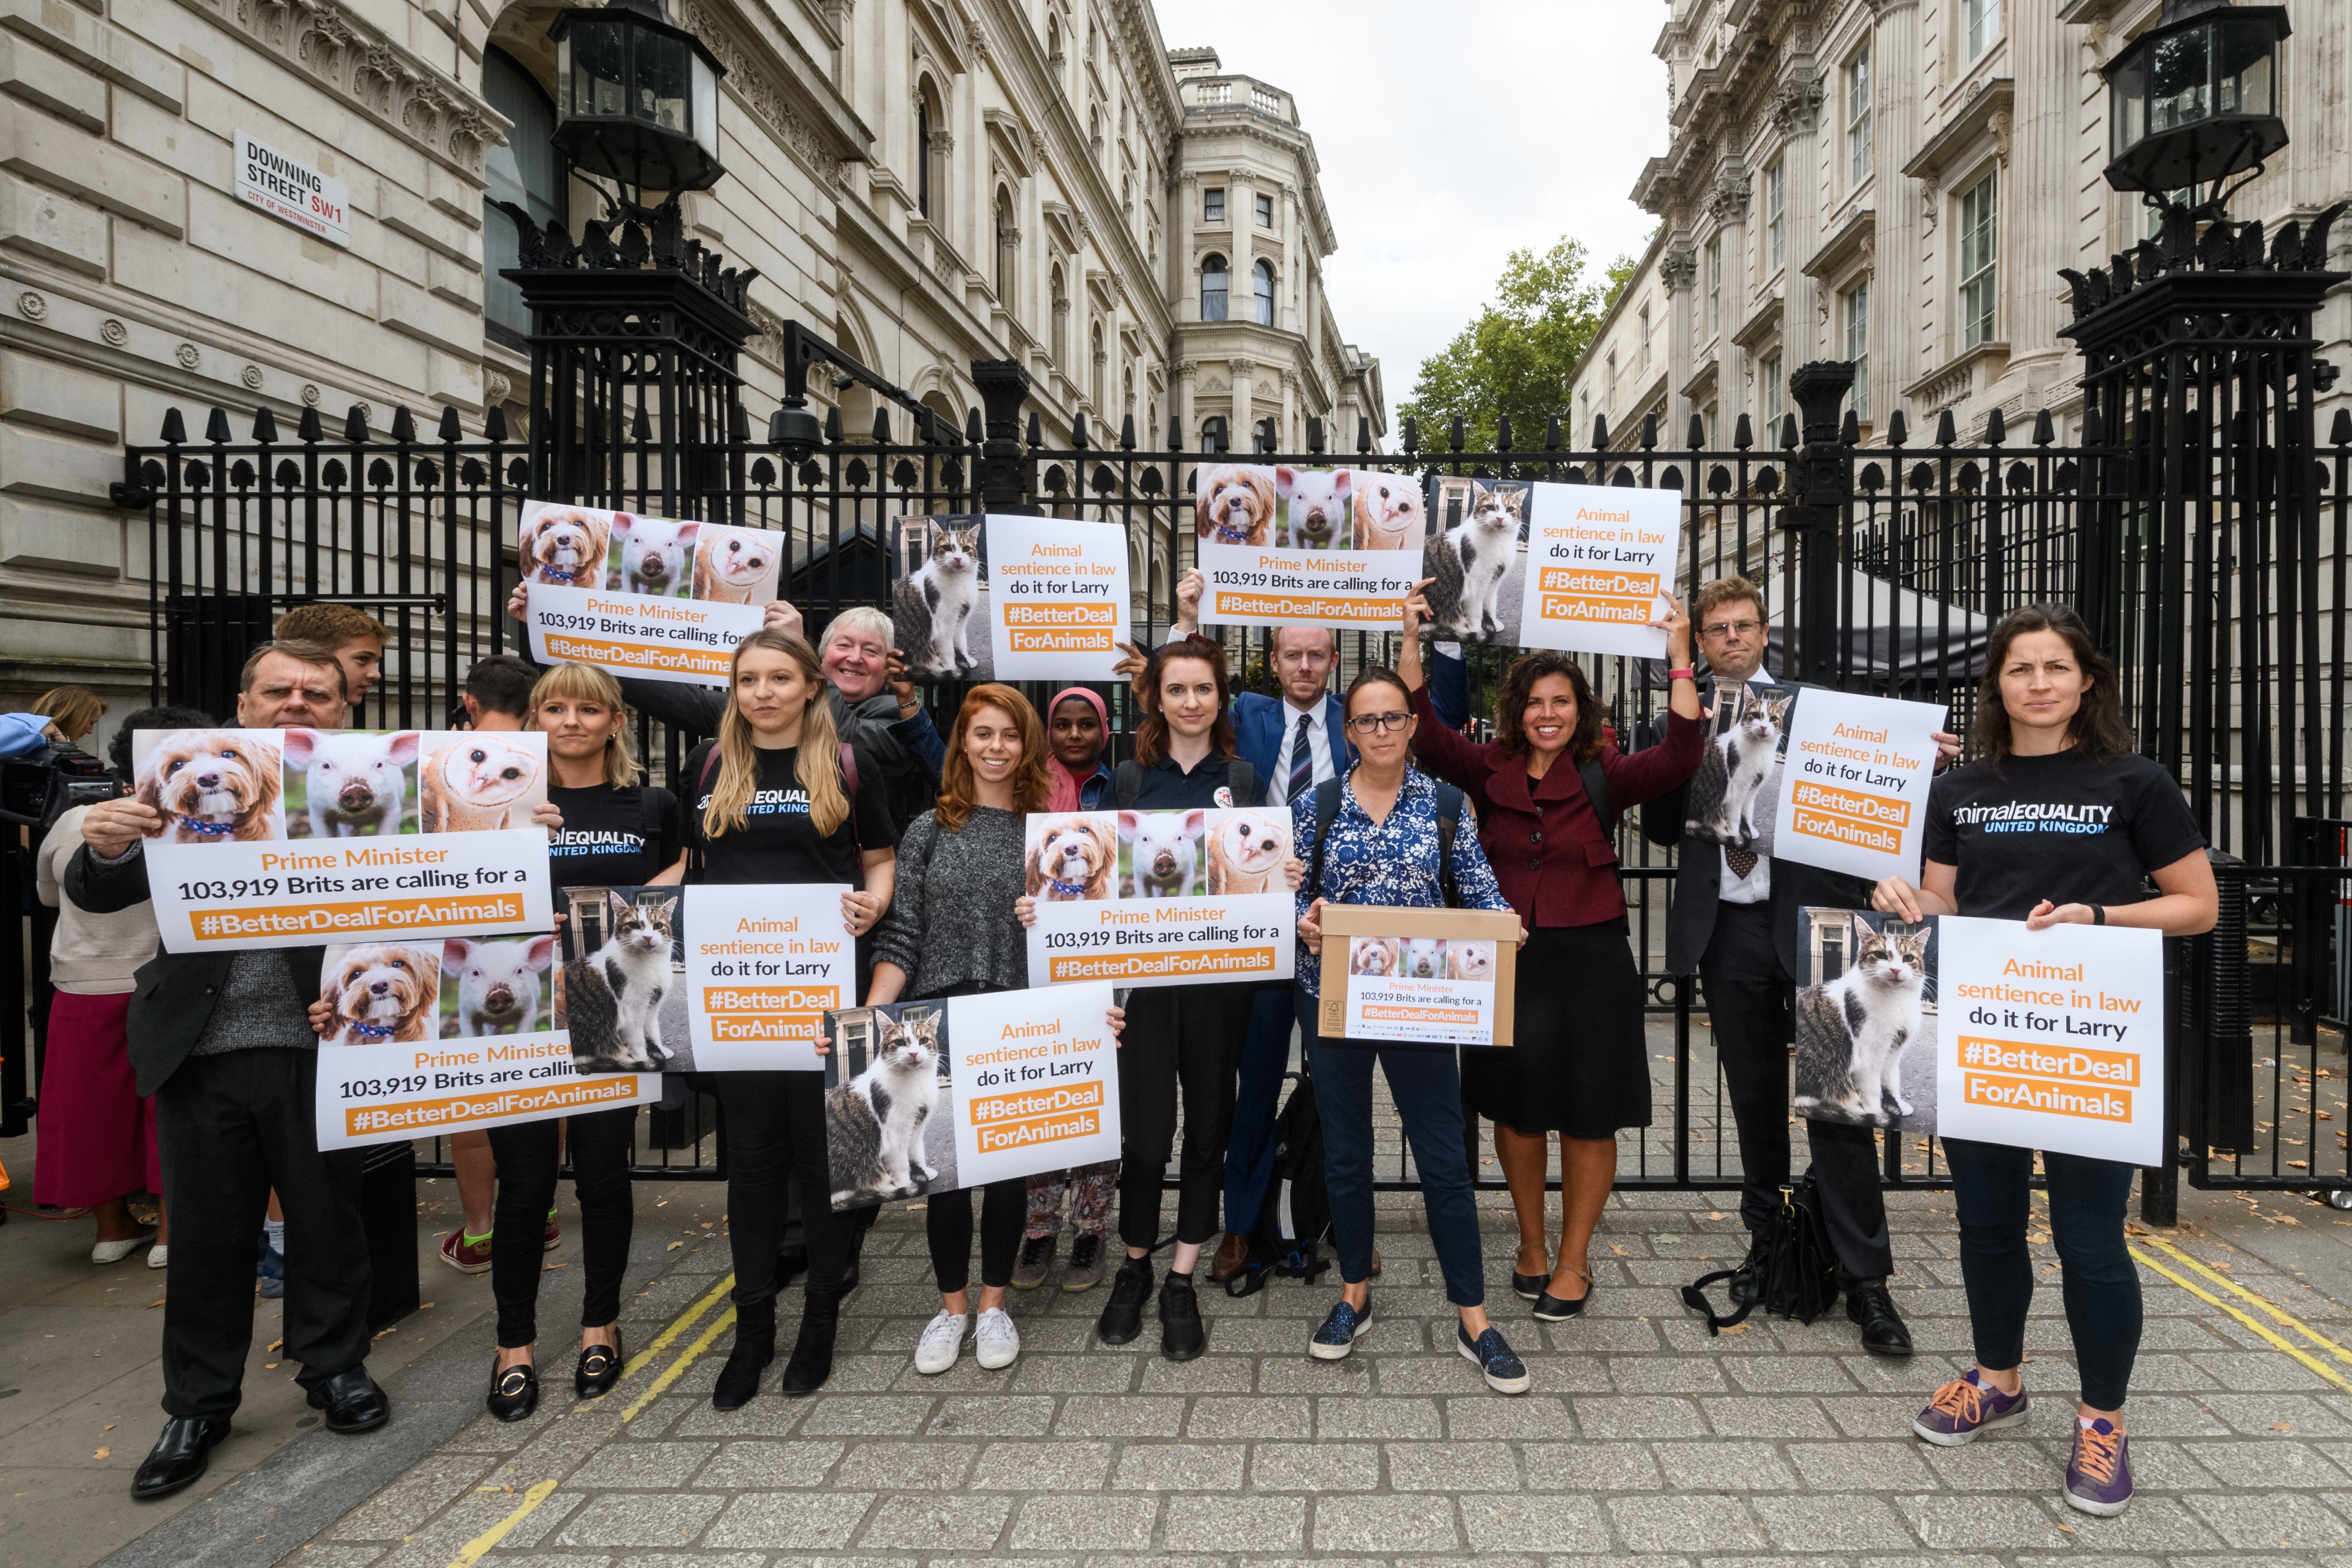 Campaigners for an animal sentience bill, which will recognise that animals have the capacity to experience feelings, deliver a petition to parliament